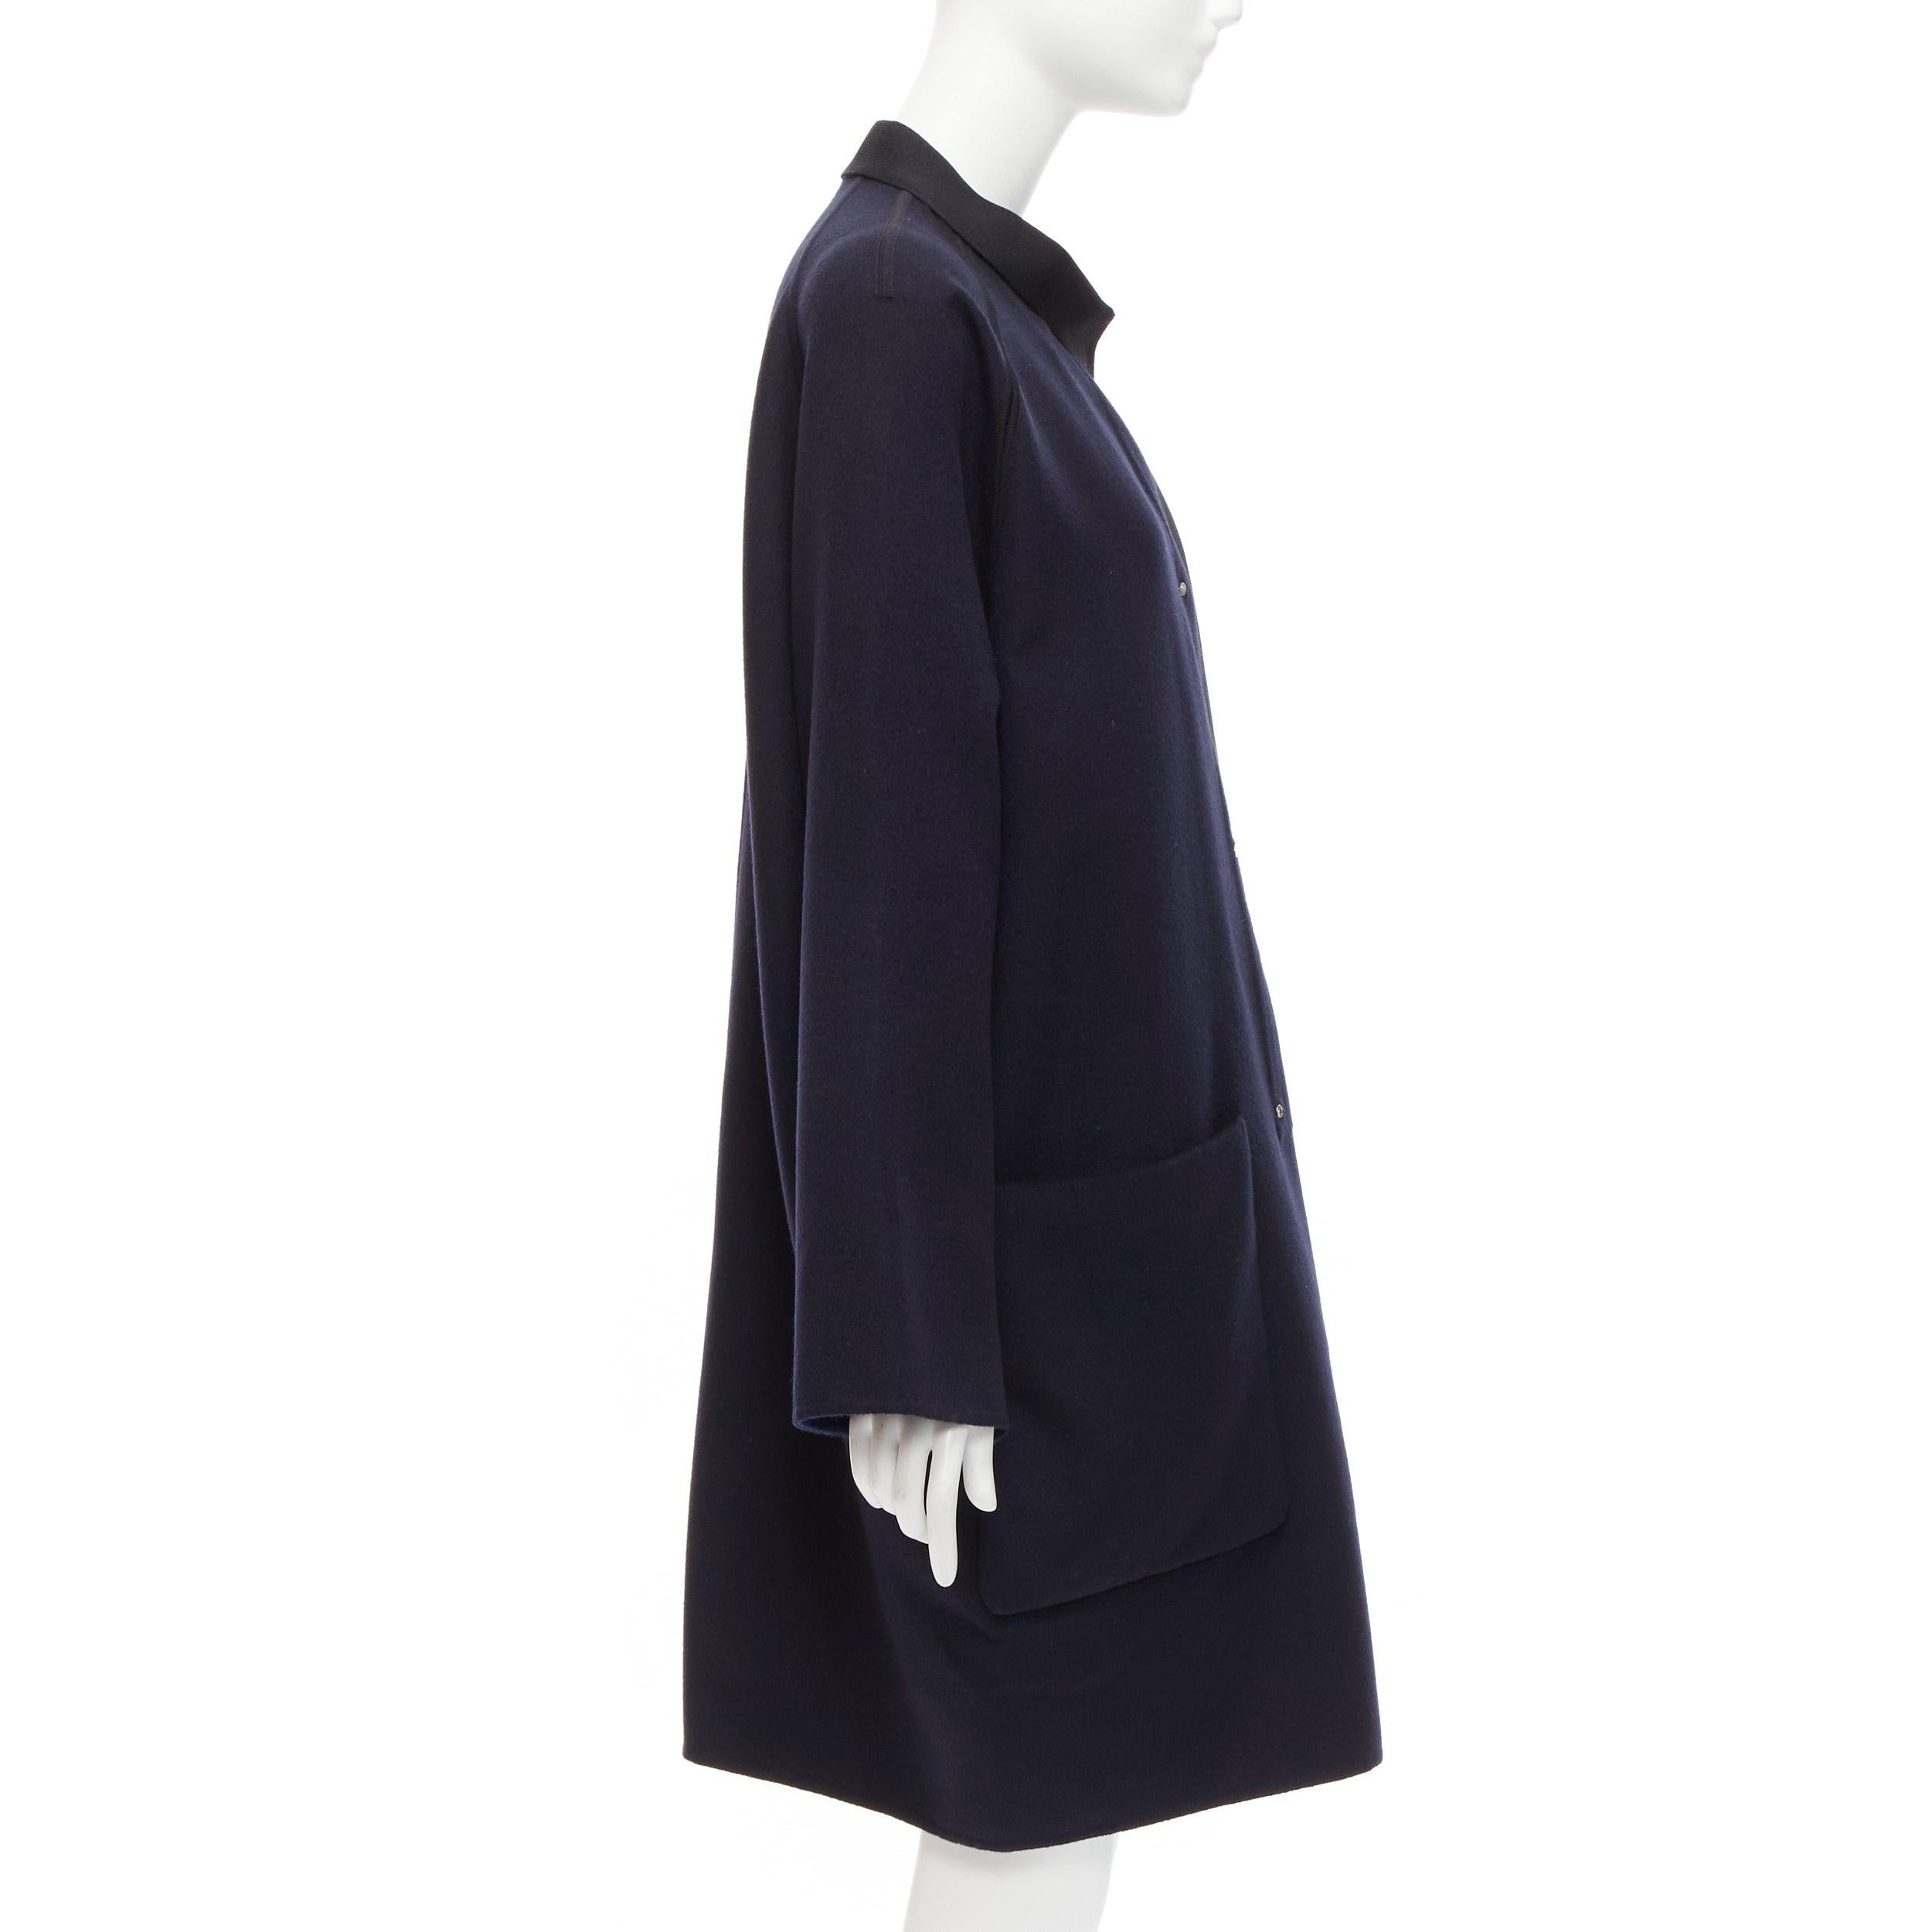 rare HERMES Martin Margiela double faced cashmere oversized cocoon coat FR42 XL For Sale 1